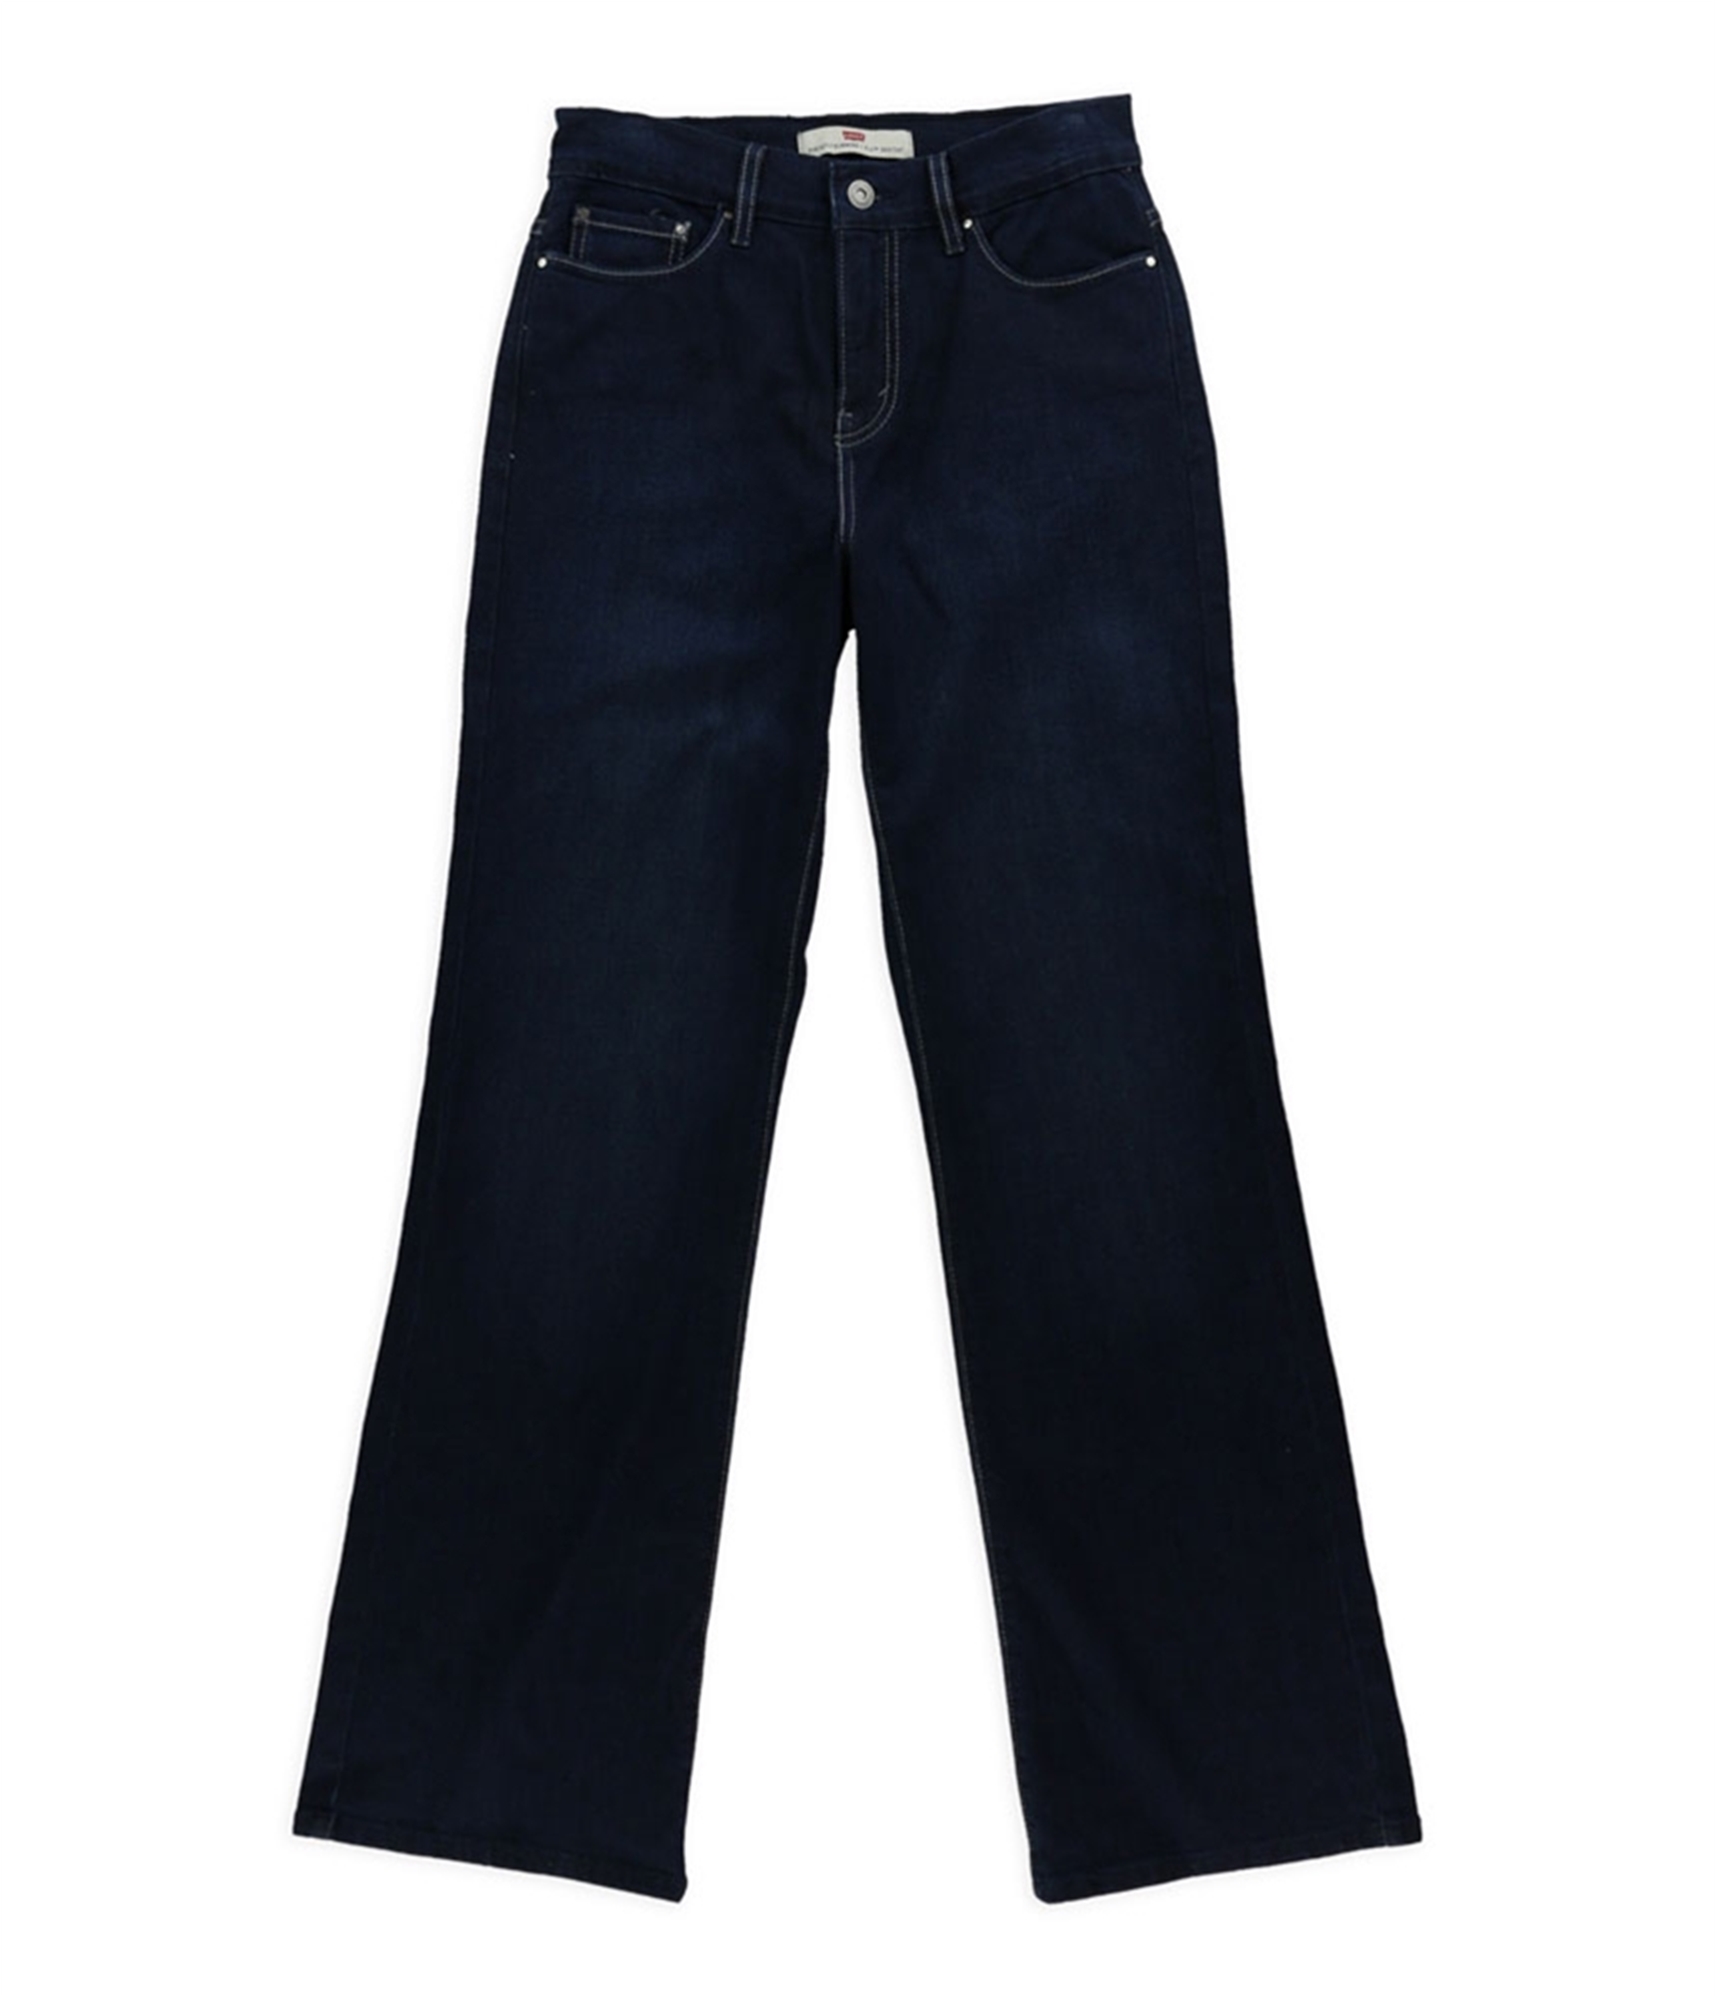 Levi's Womens 512 Perfectly Slimming Boot Cut Jeans | Womens Apparel ...